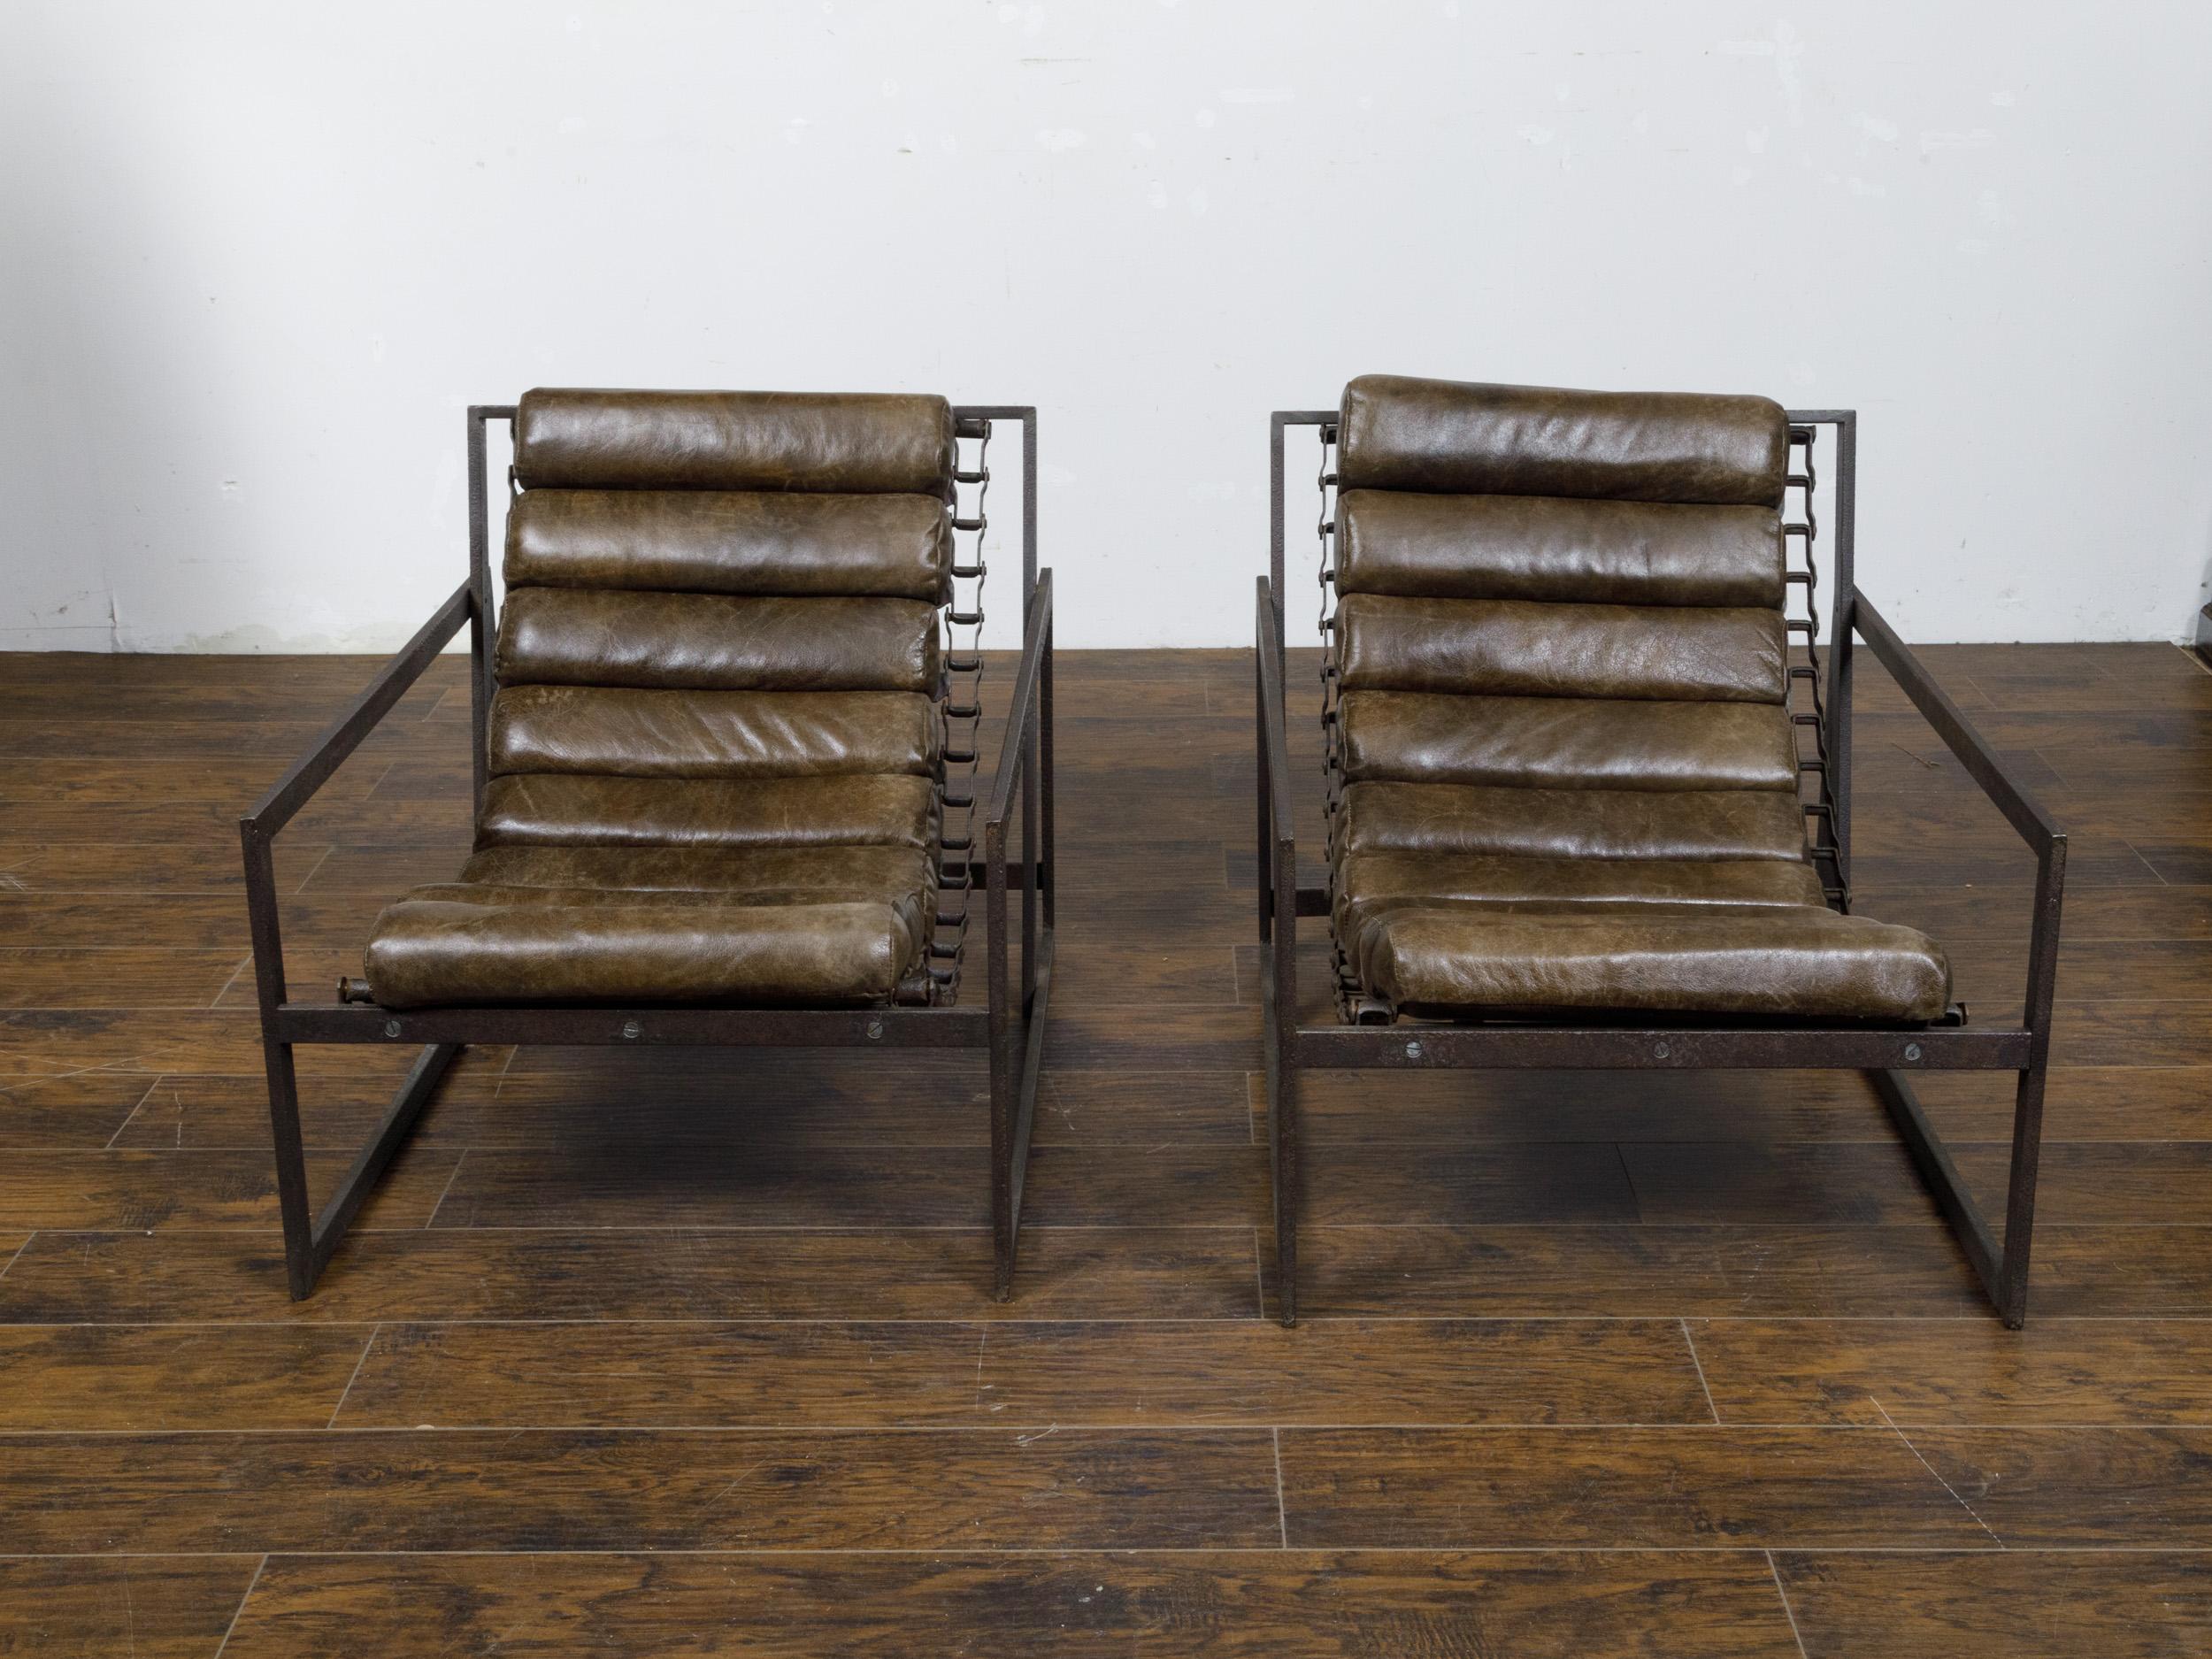 A pair of Industrial iron and leather sling transat chairs from the 20th century. This pair of 20th-century Industrial iron and leather sling 